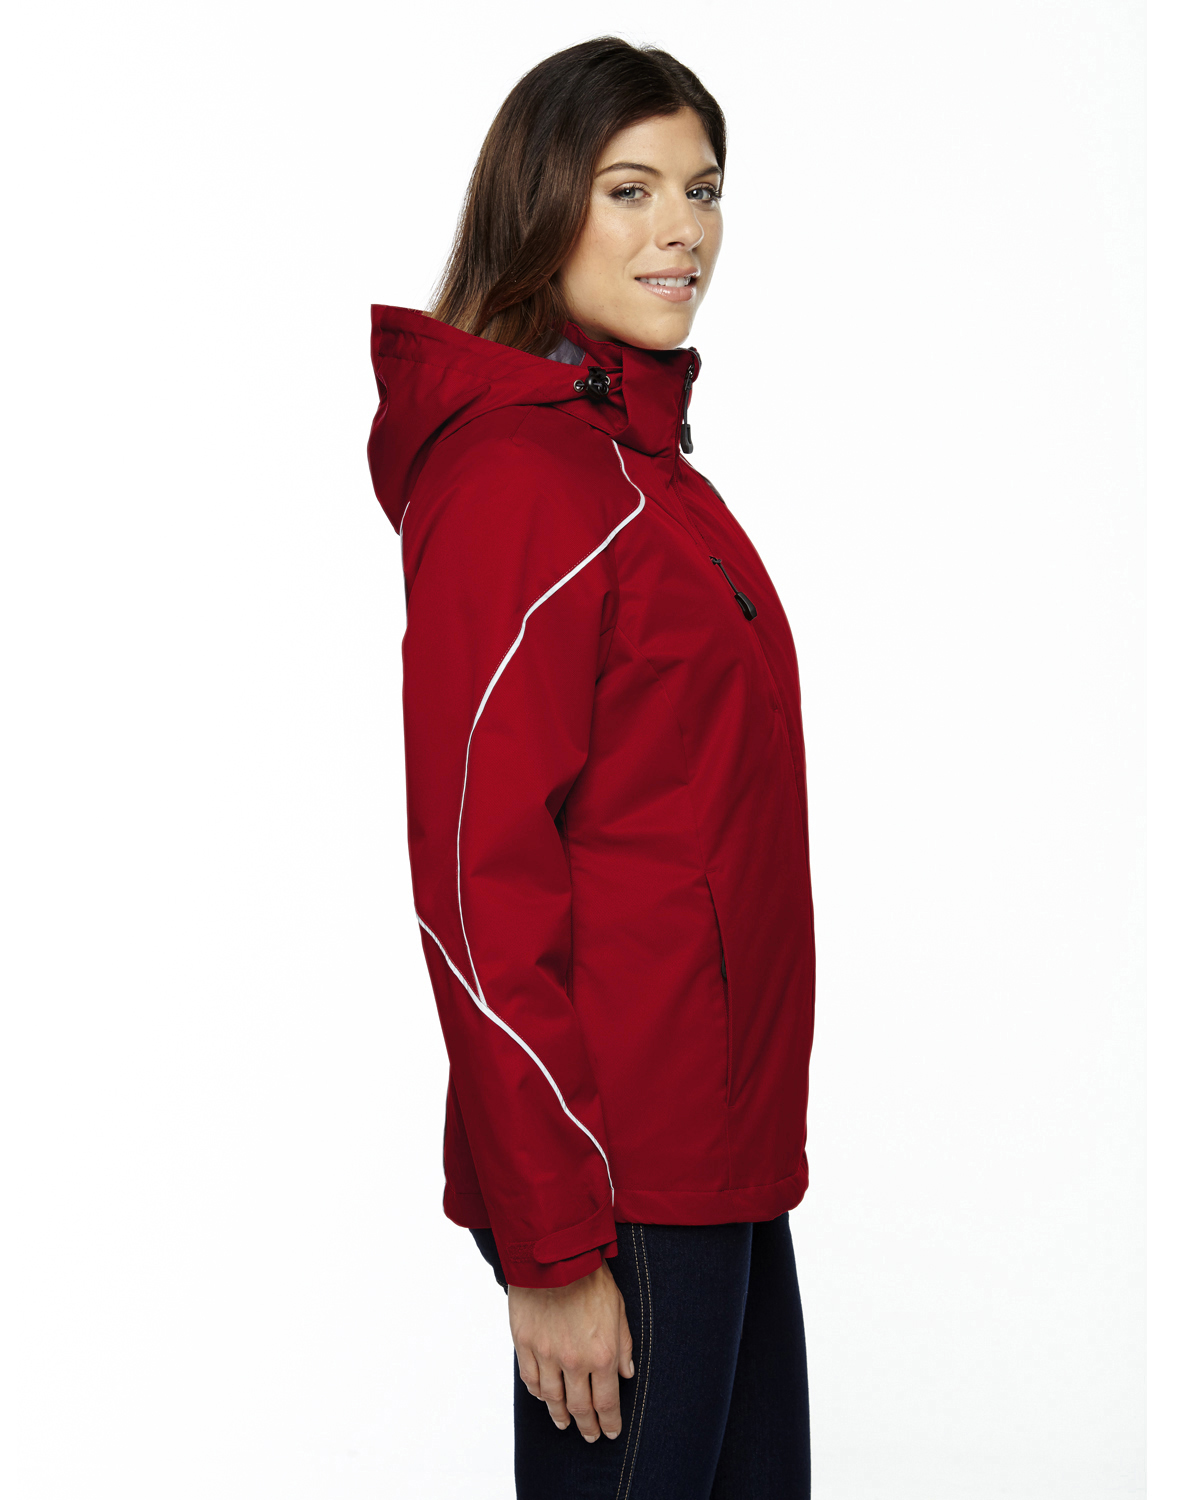 Ladies' Angle 3-in-1 Jacket with Bonded Fleece Liner - CLASSIC RED - S - image 3 of 3